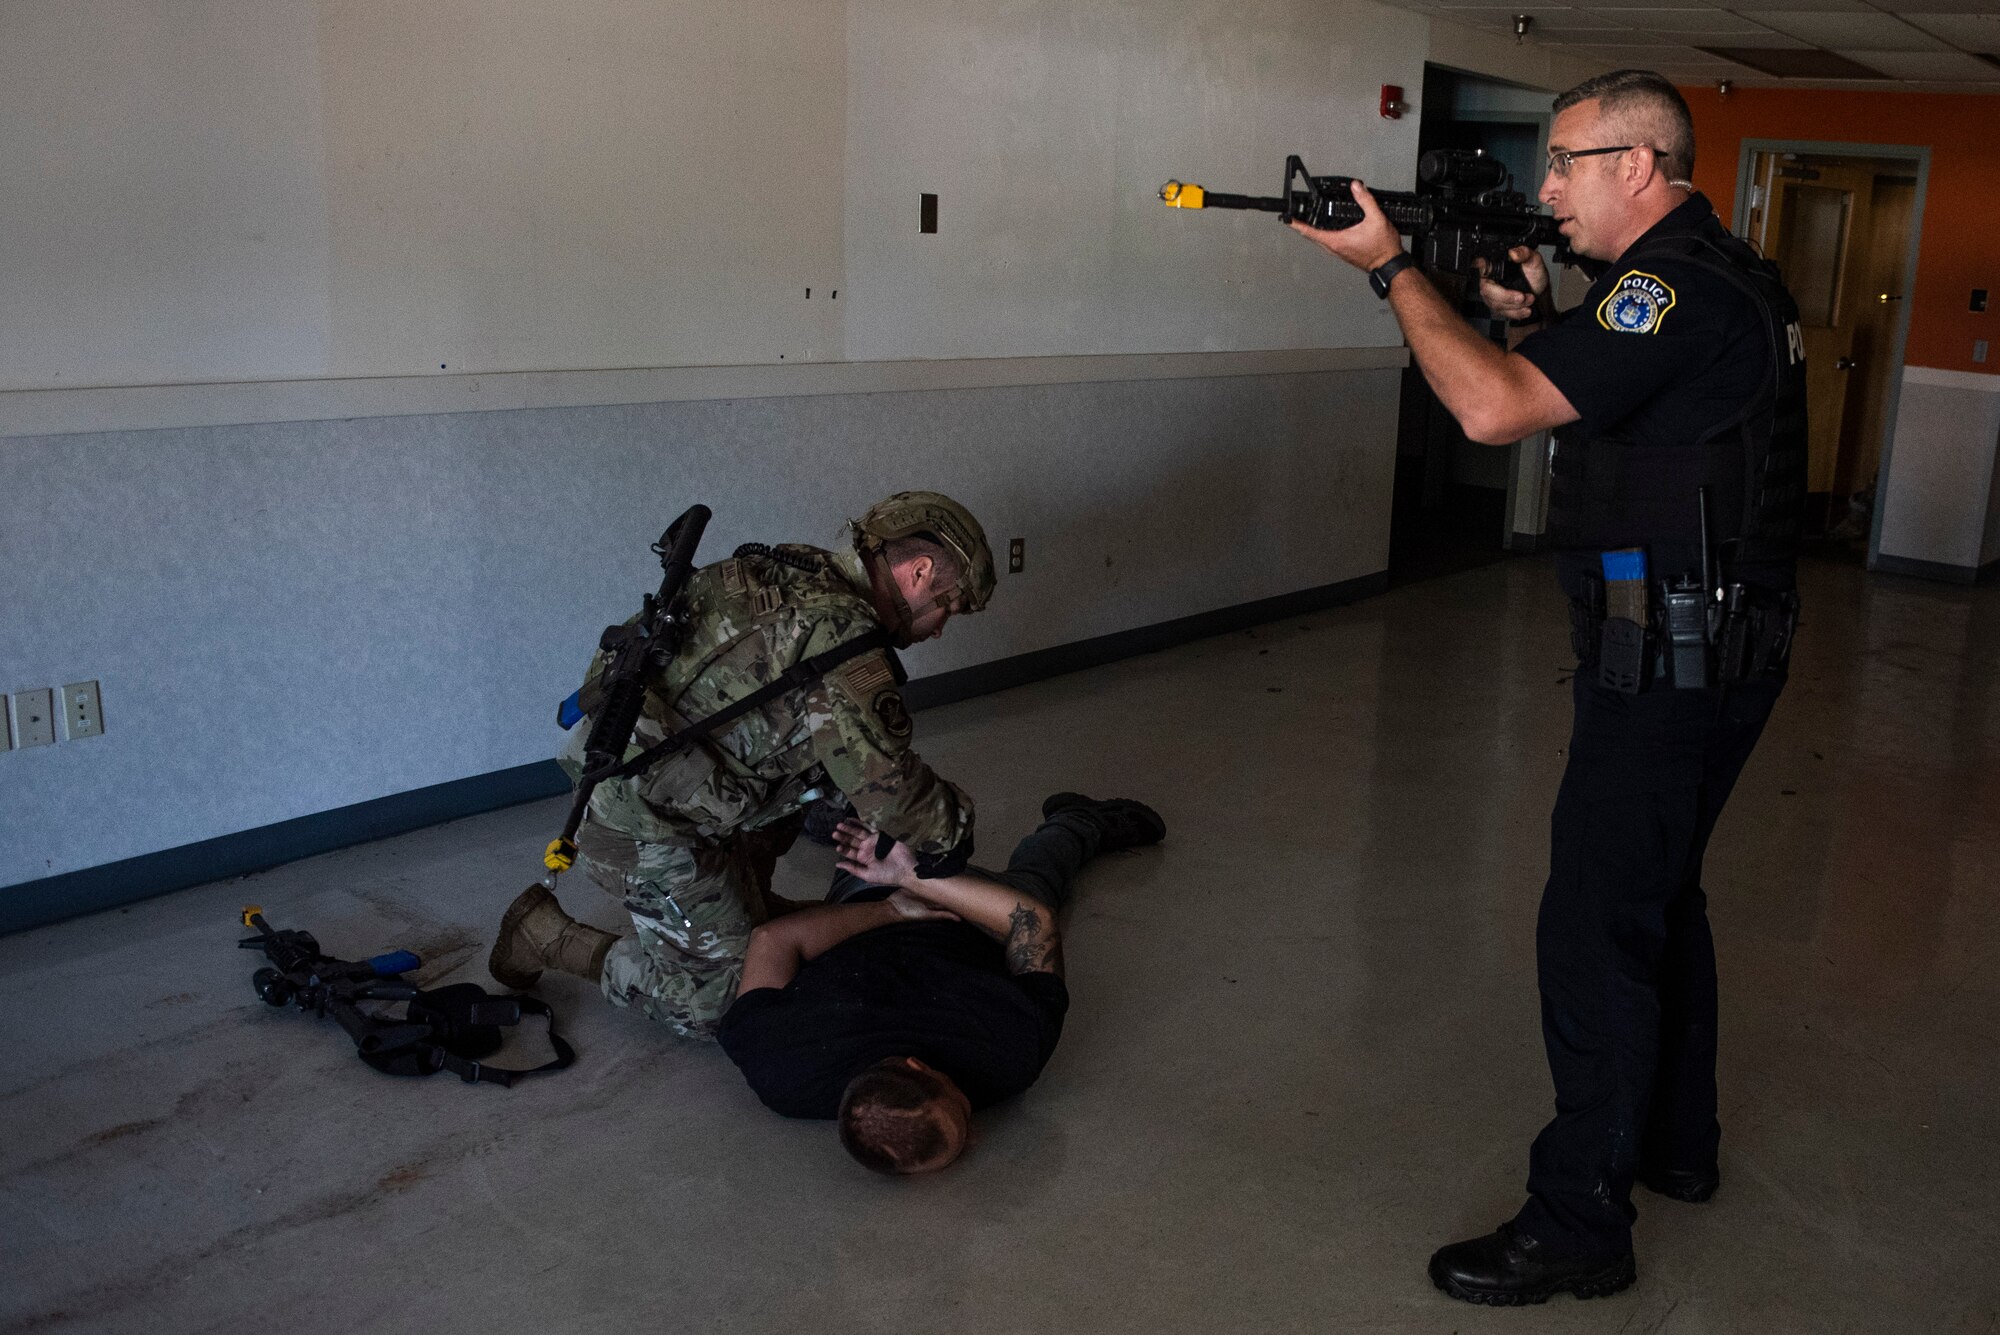 Members of the 88th Security Forces Squadron take down the “active shooter” after locating and eliminating the threat during an exercise, Aug. 18 at Wright-Patterson Air Force Base. (U.S. Air Force photo by Wesley Farnsworth)